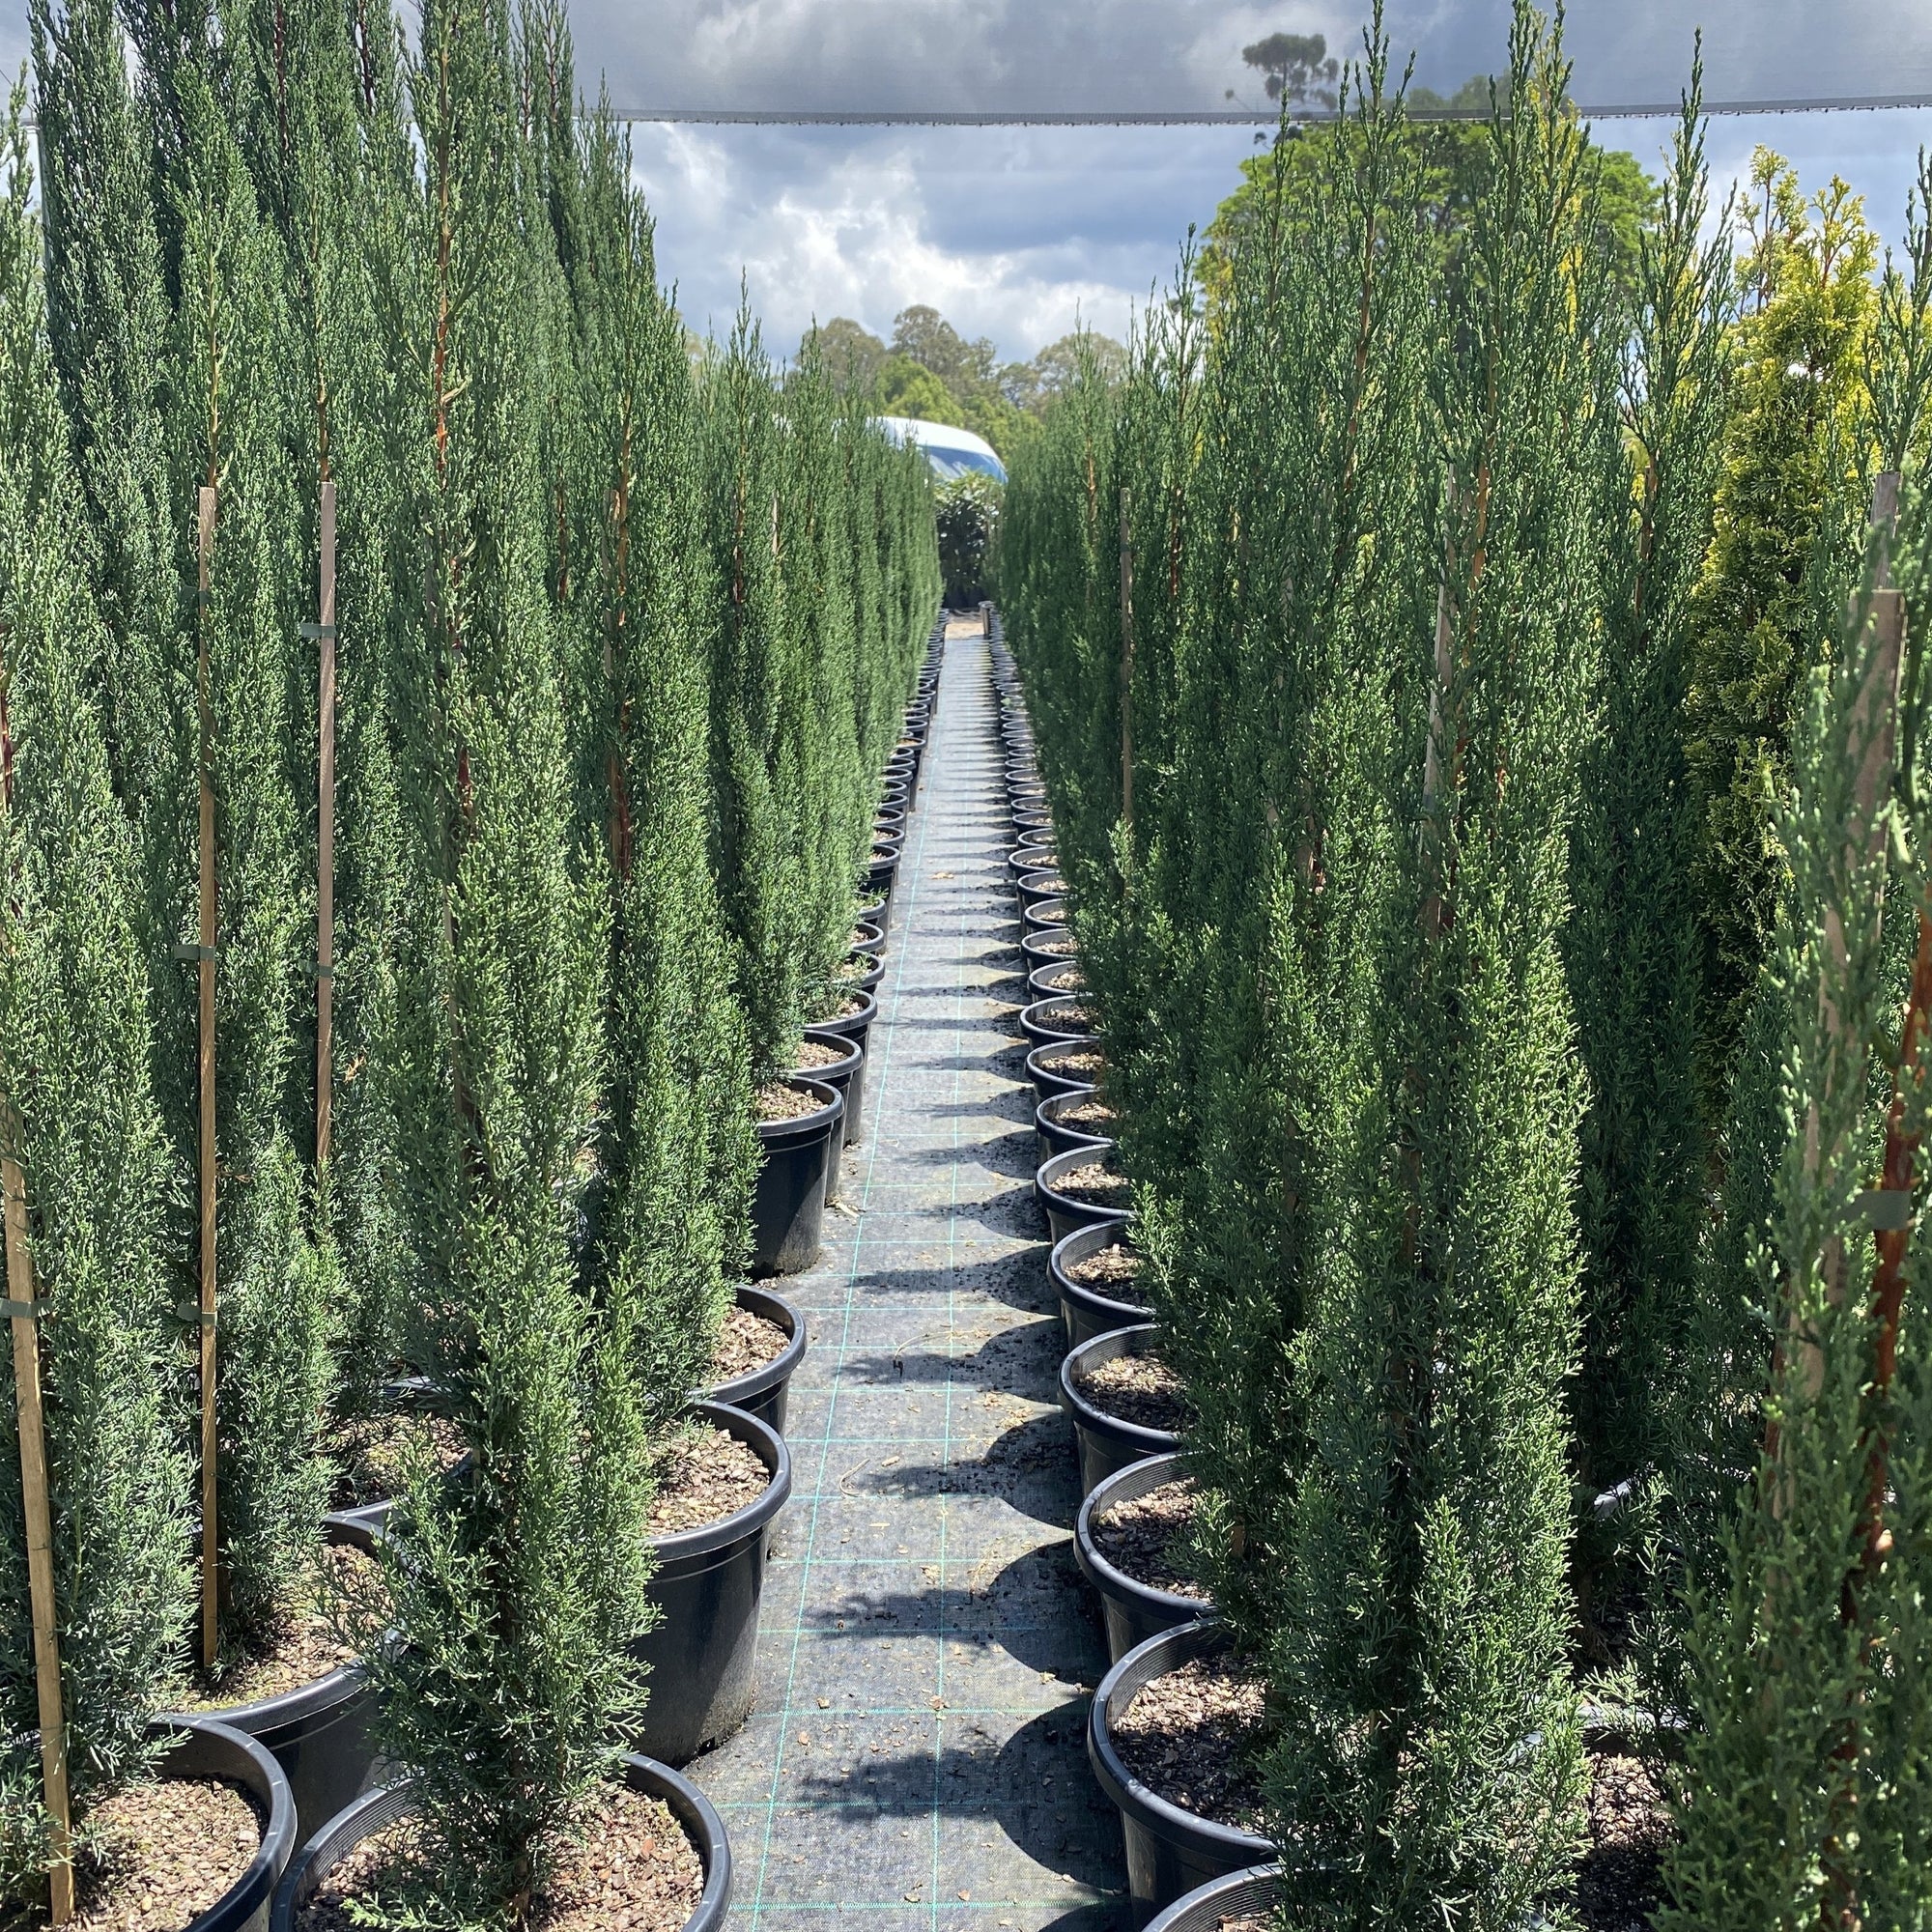 Cupressus sempervirens 'Glauca' is a fast growing and very dense but slender cypress